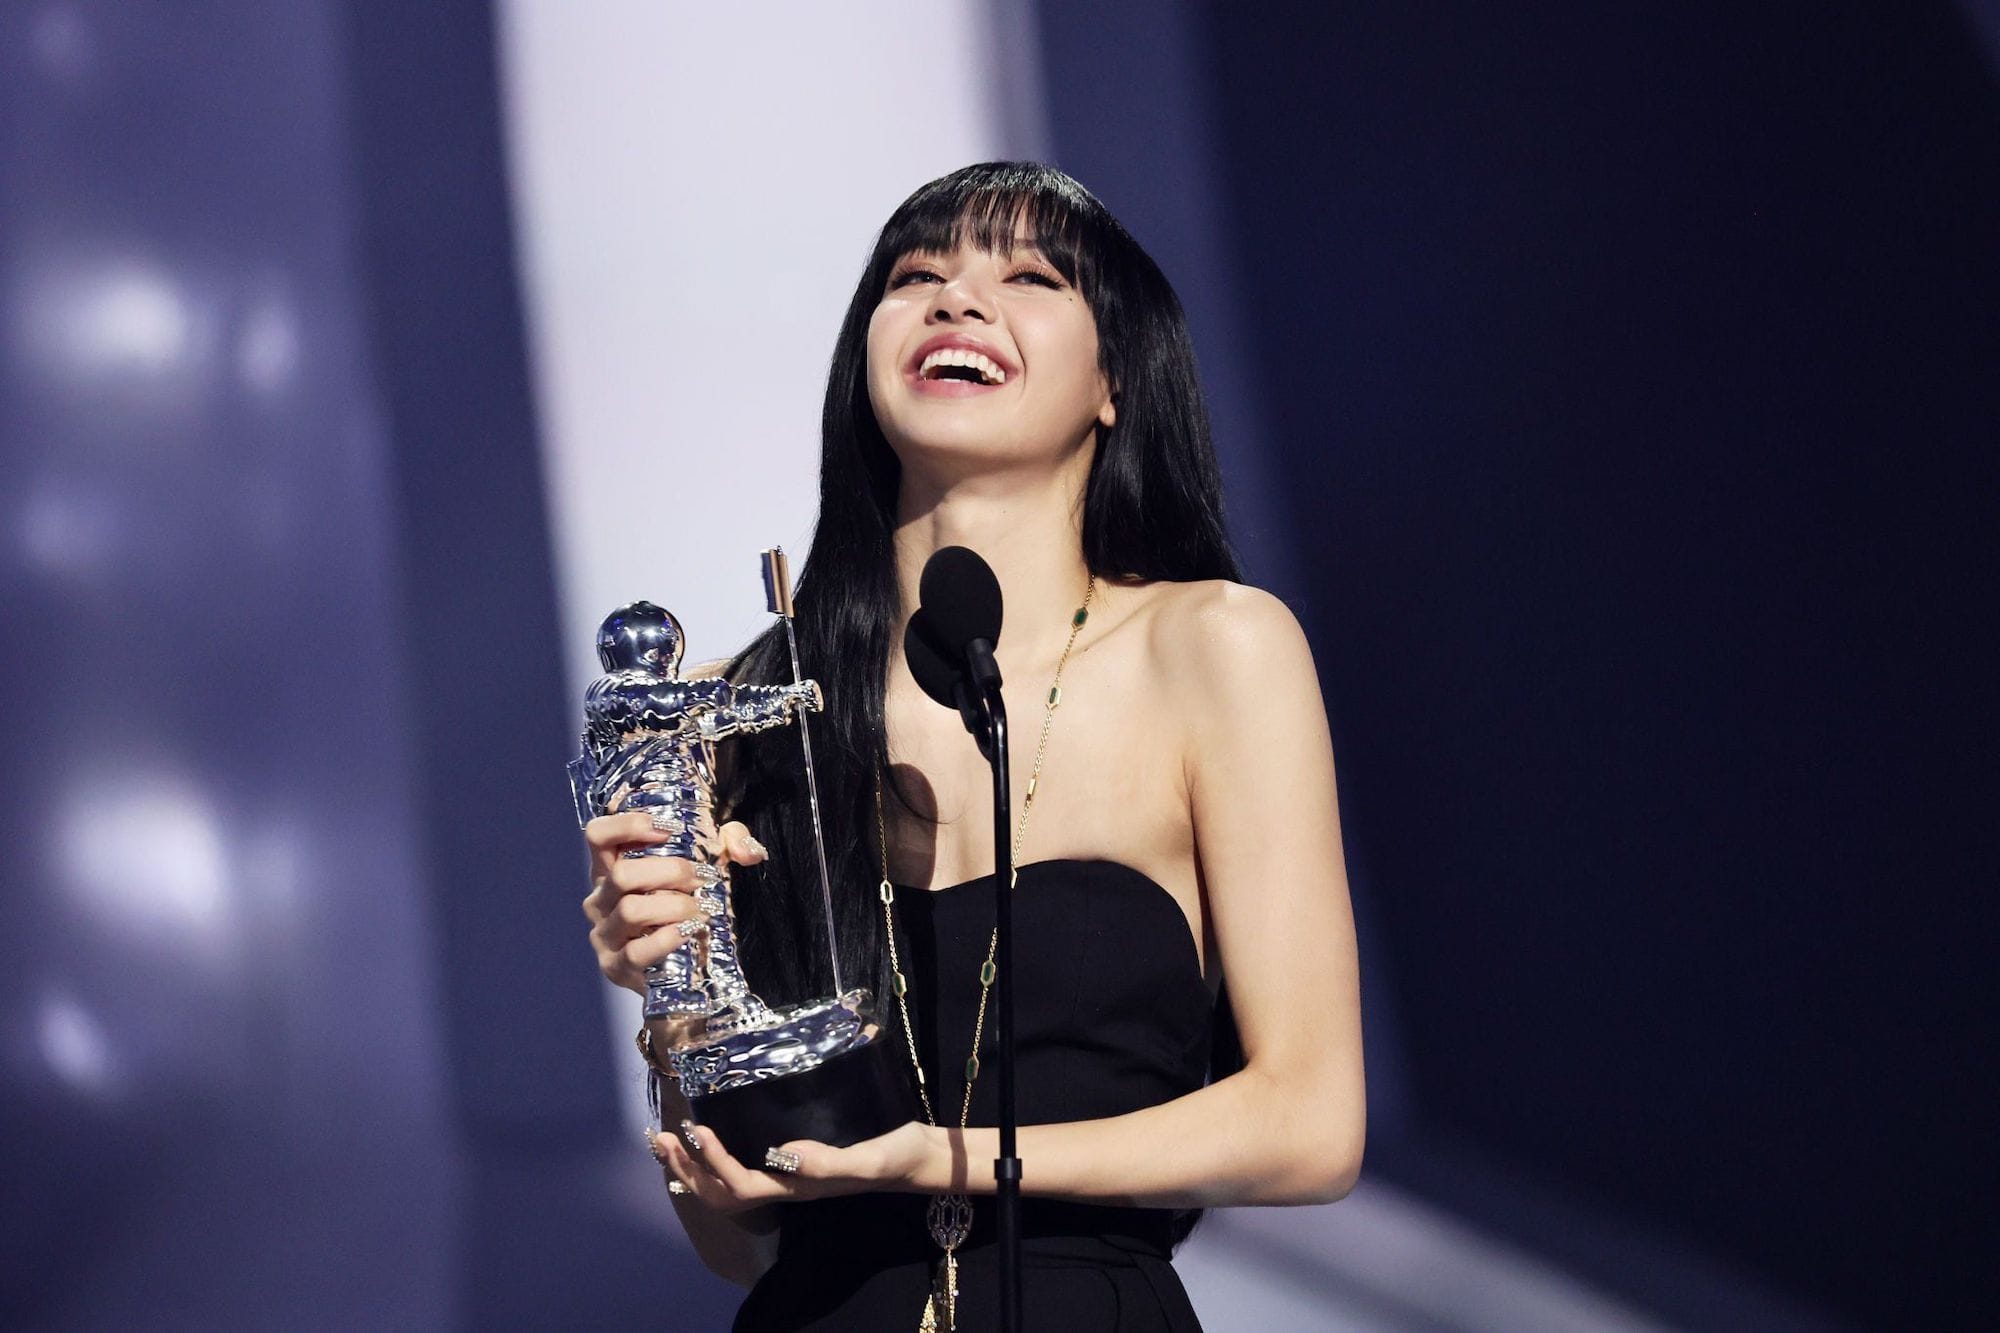 Lisa is all smiles after making history at the 2022 VMAs.